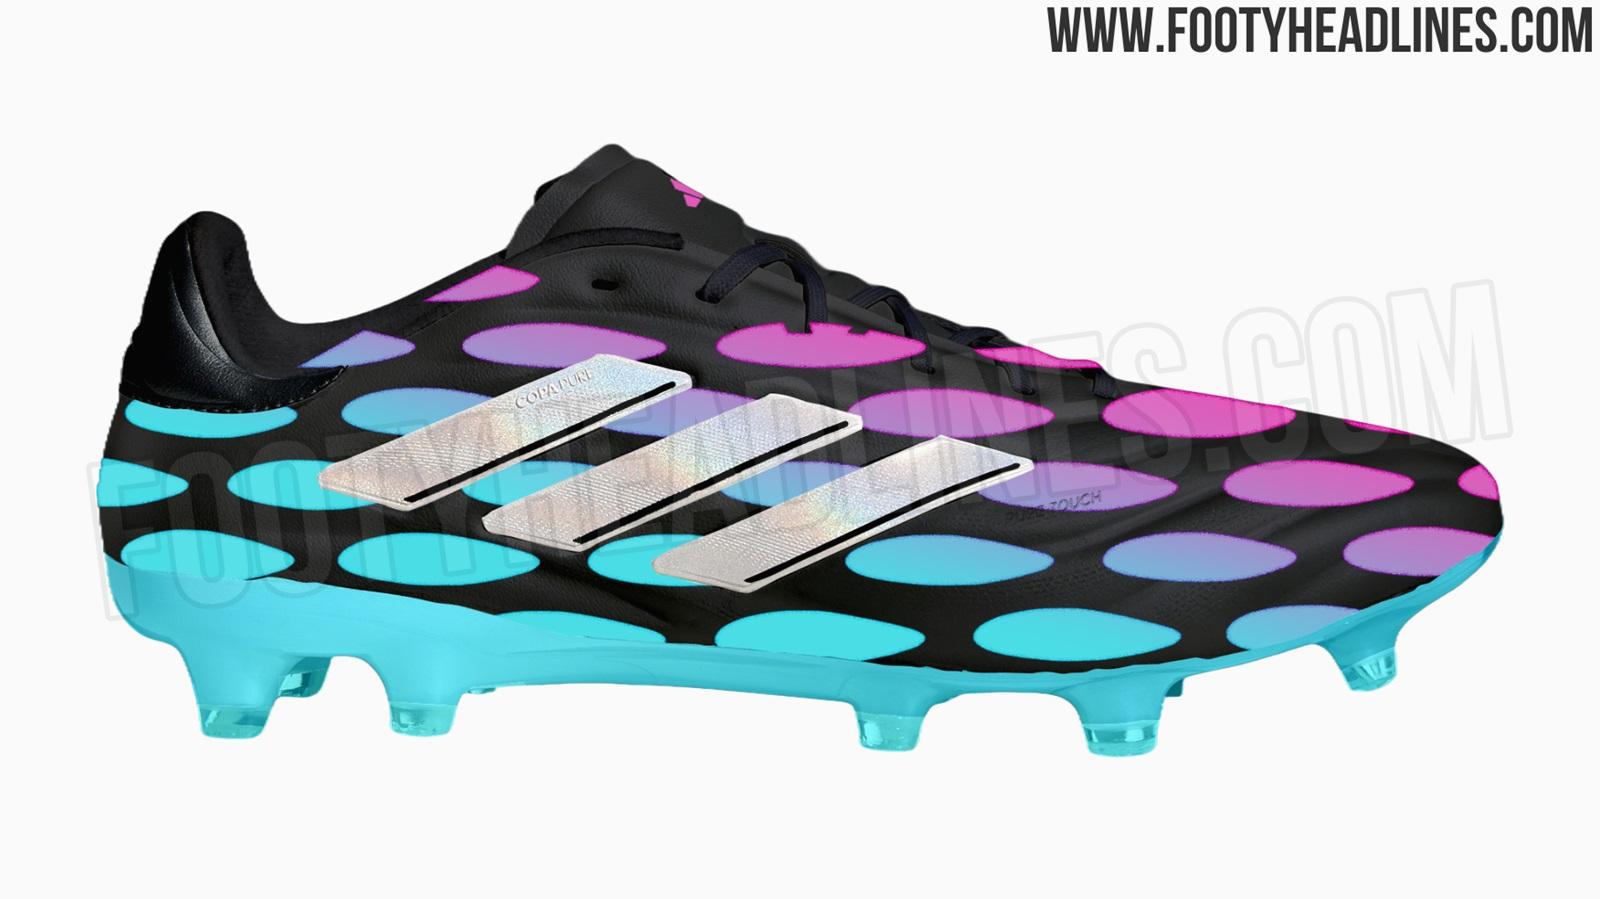 Spectacular Adidas Copa Pure Ii Boots Leaked Footy Headlines